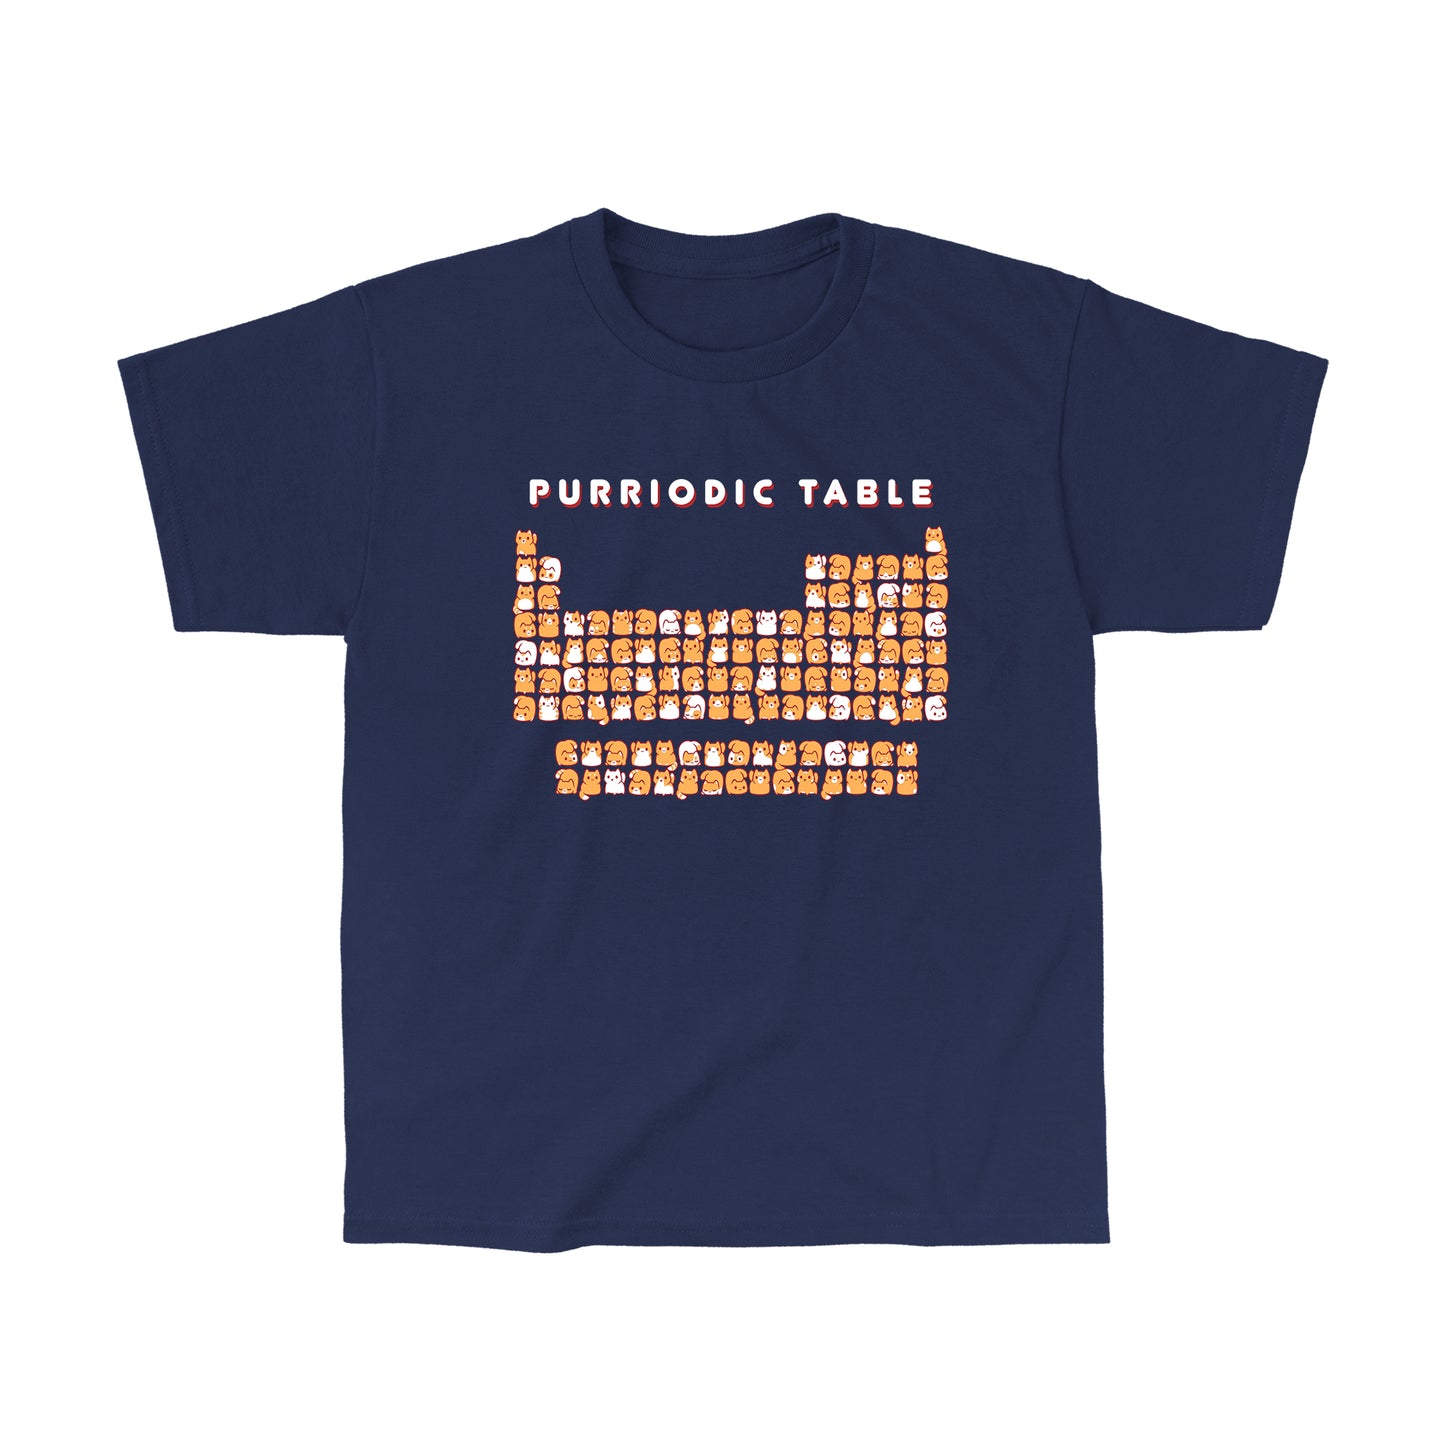 Classic Cotton T-shirt_TeeTurtle Purriodic Table navy blue t-shirt featuring a periodic table chart with elements represented by cats.